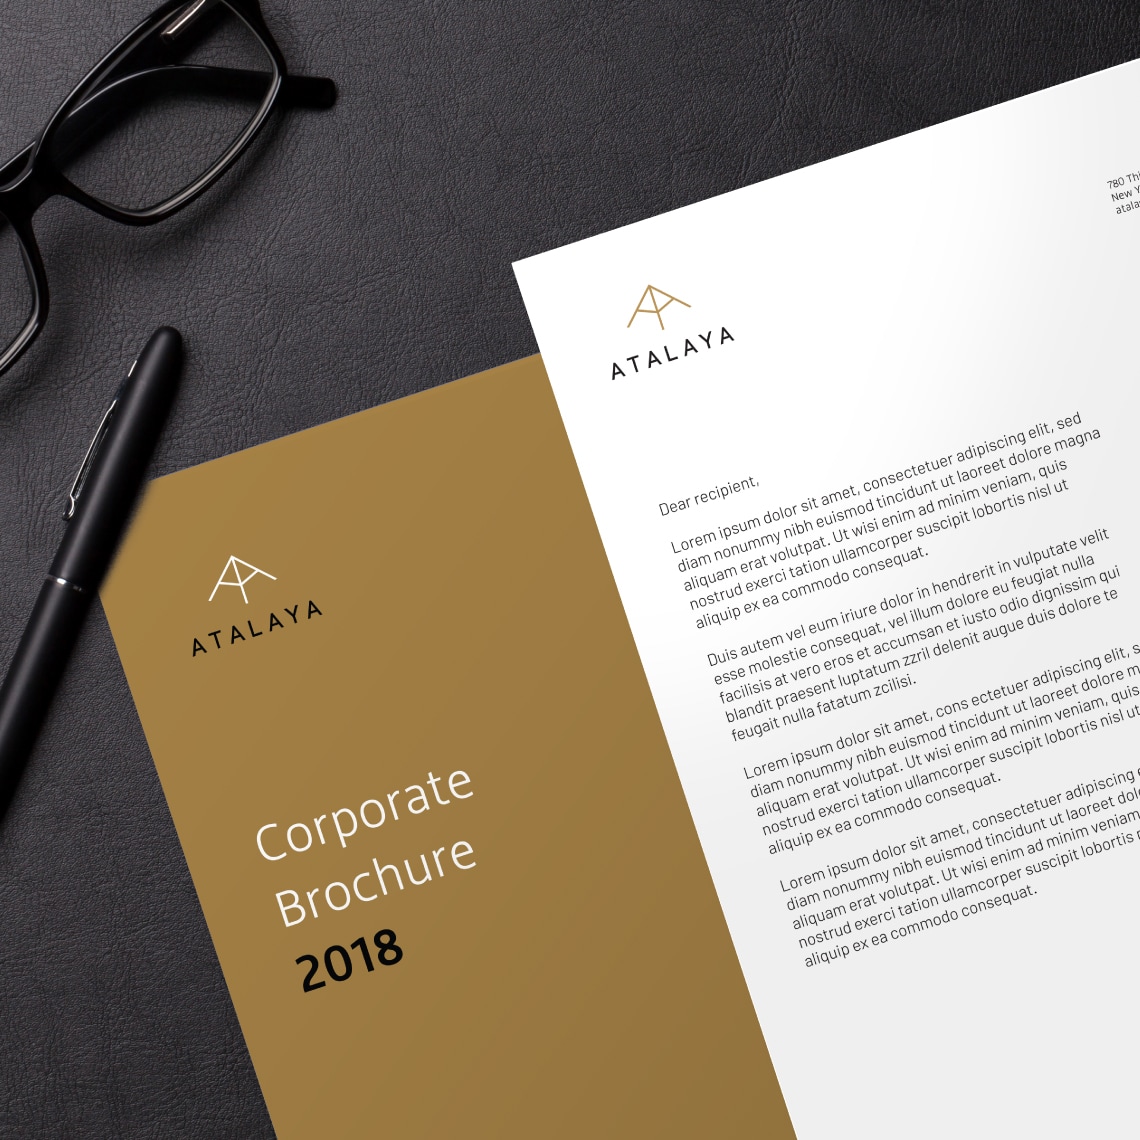 examples of printed material including letterhead and corporate brochure